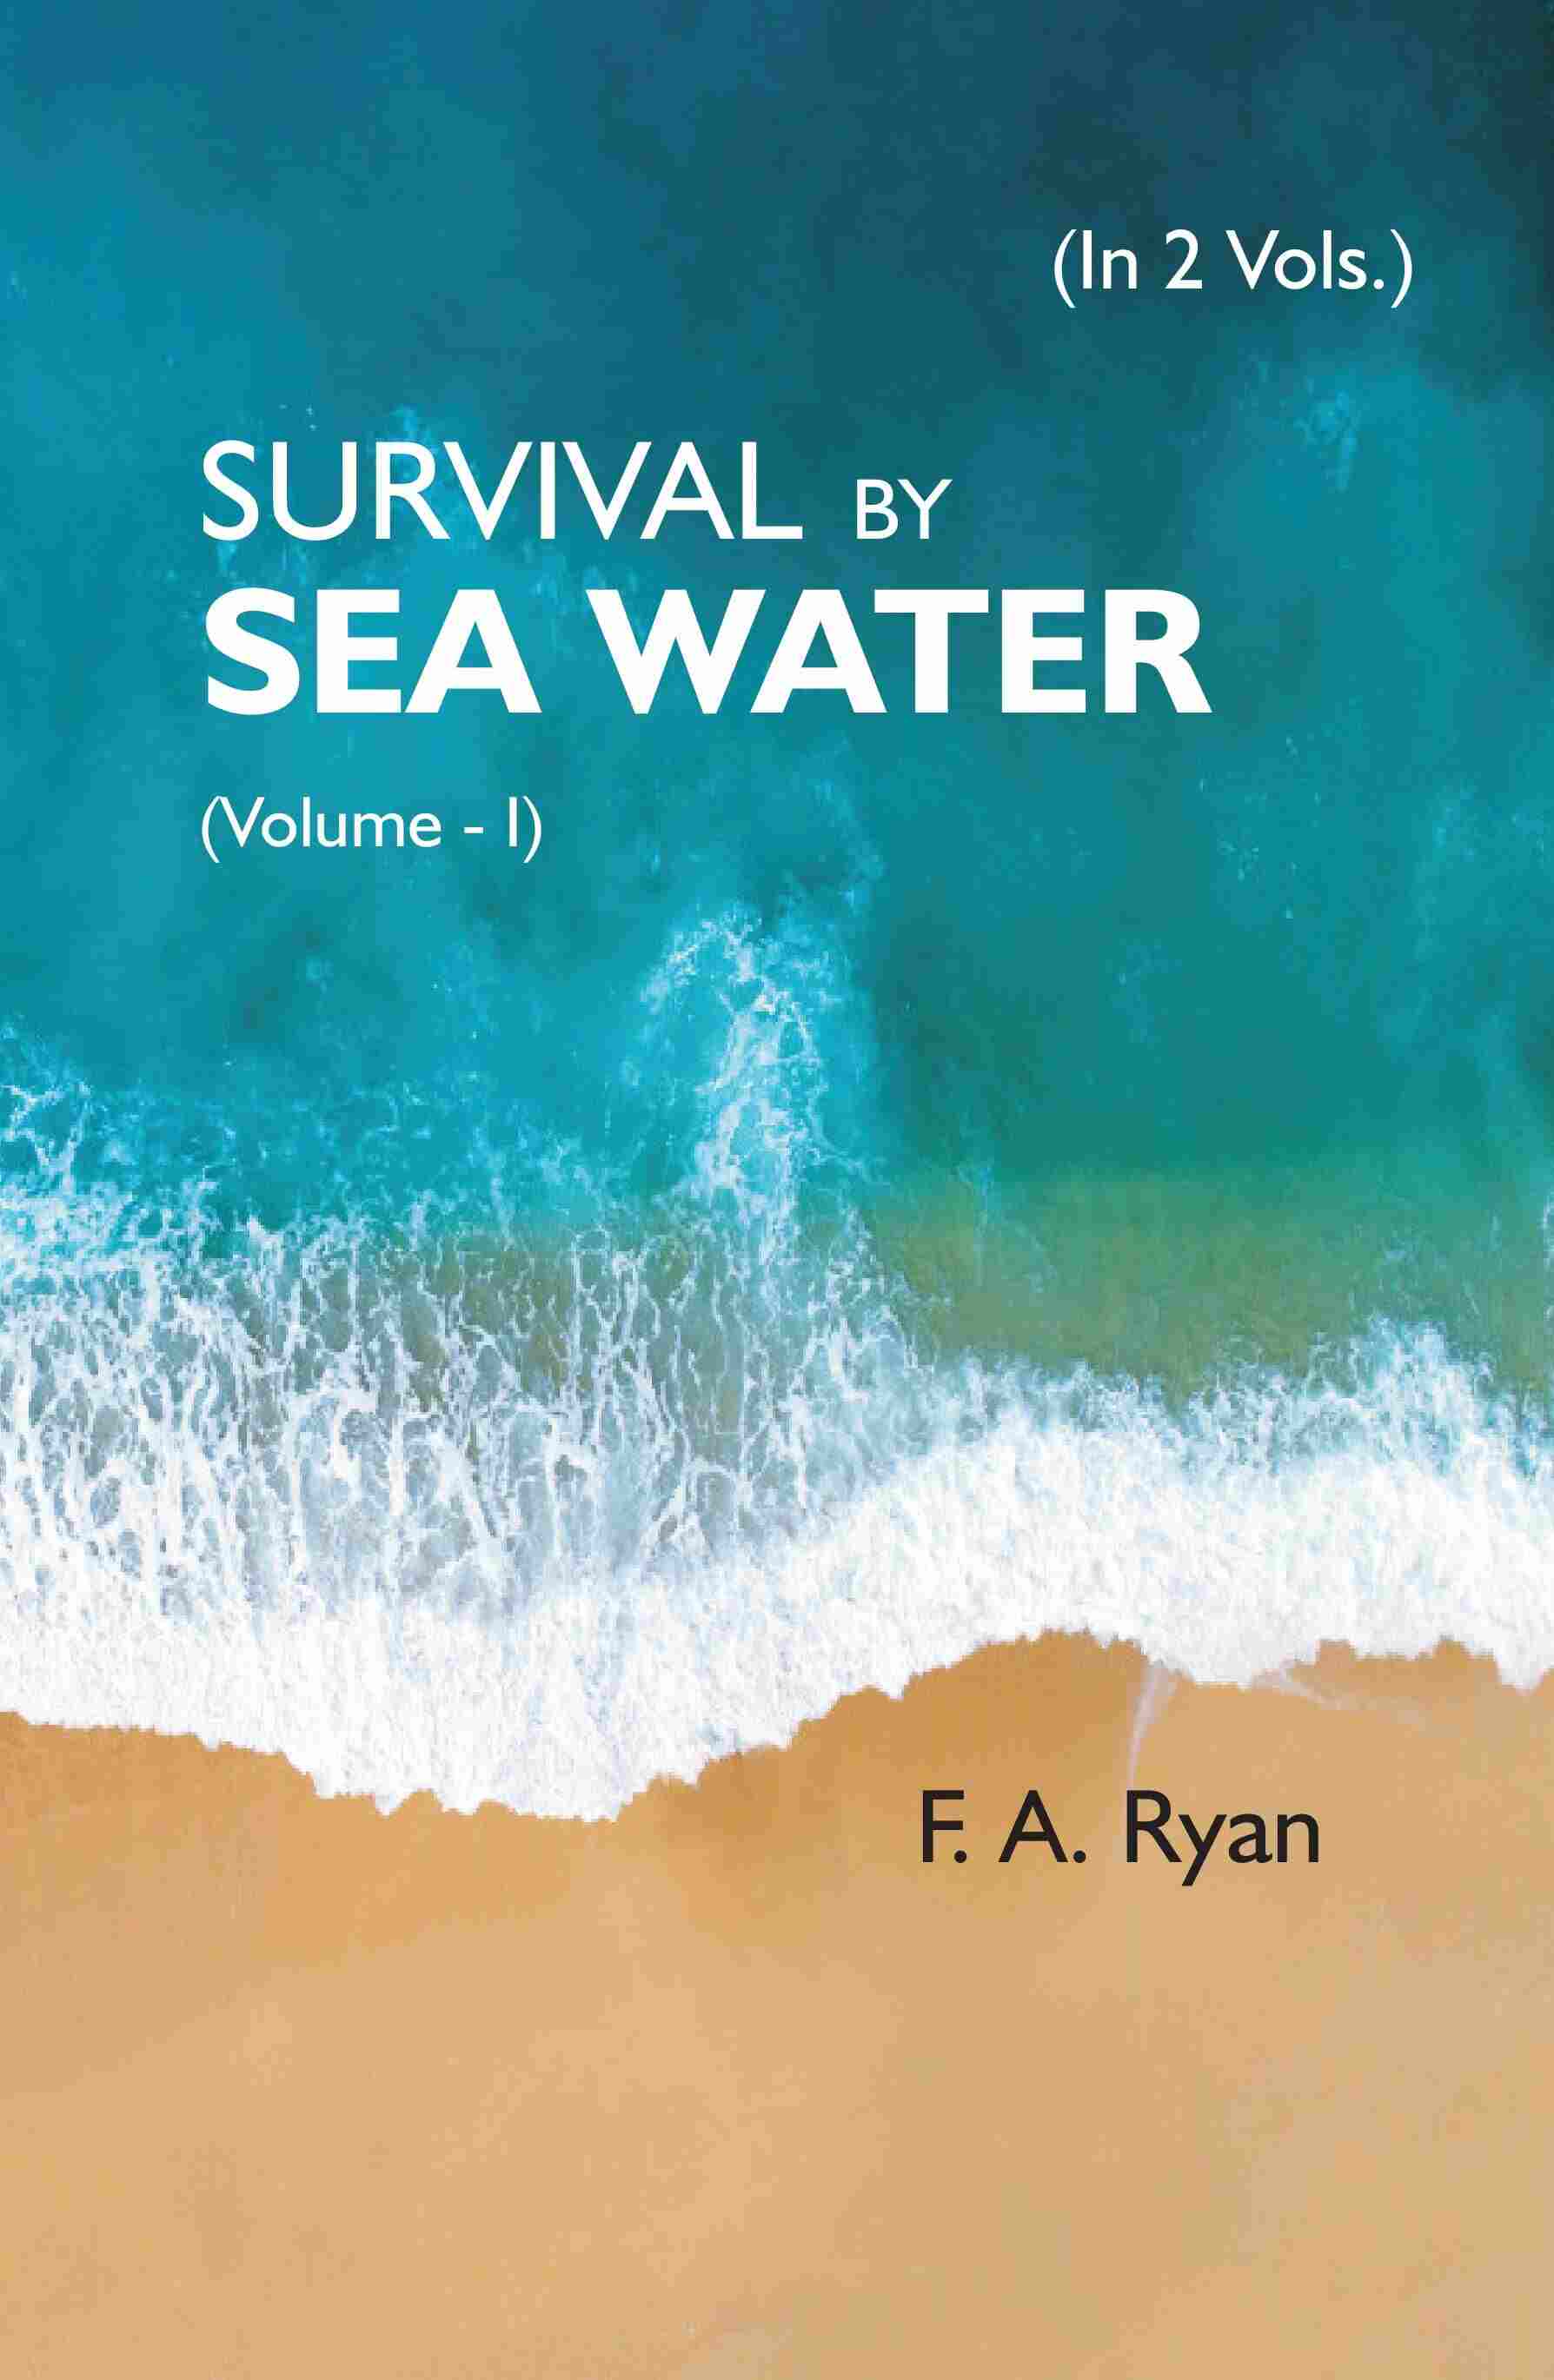 SURVIVAL BY SEA WATER